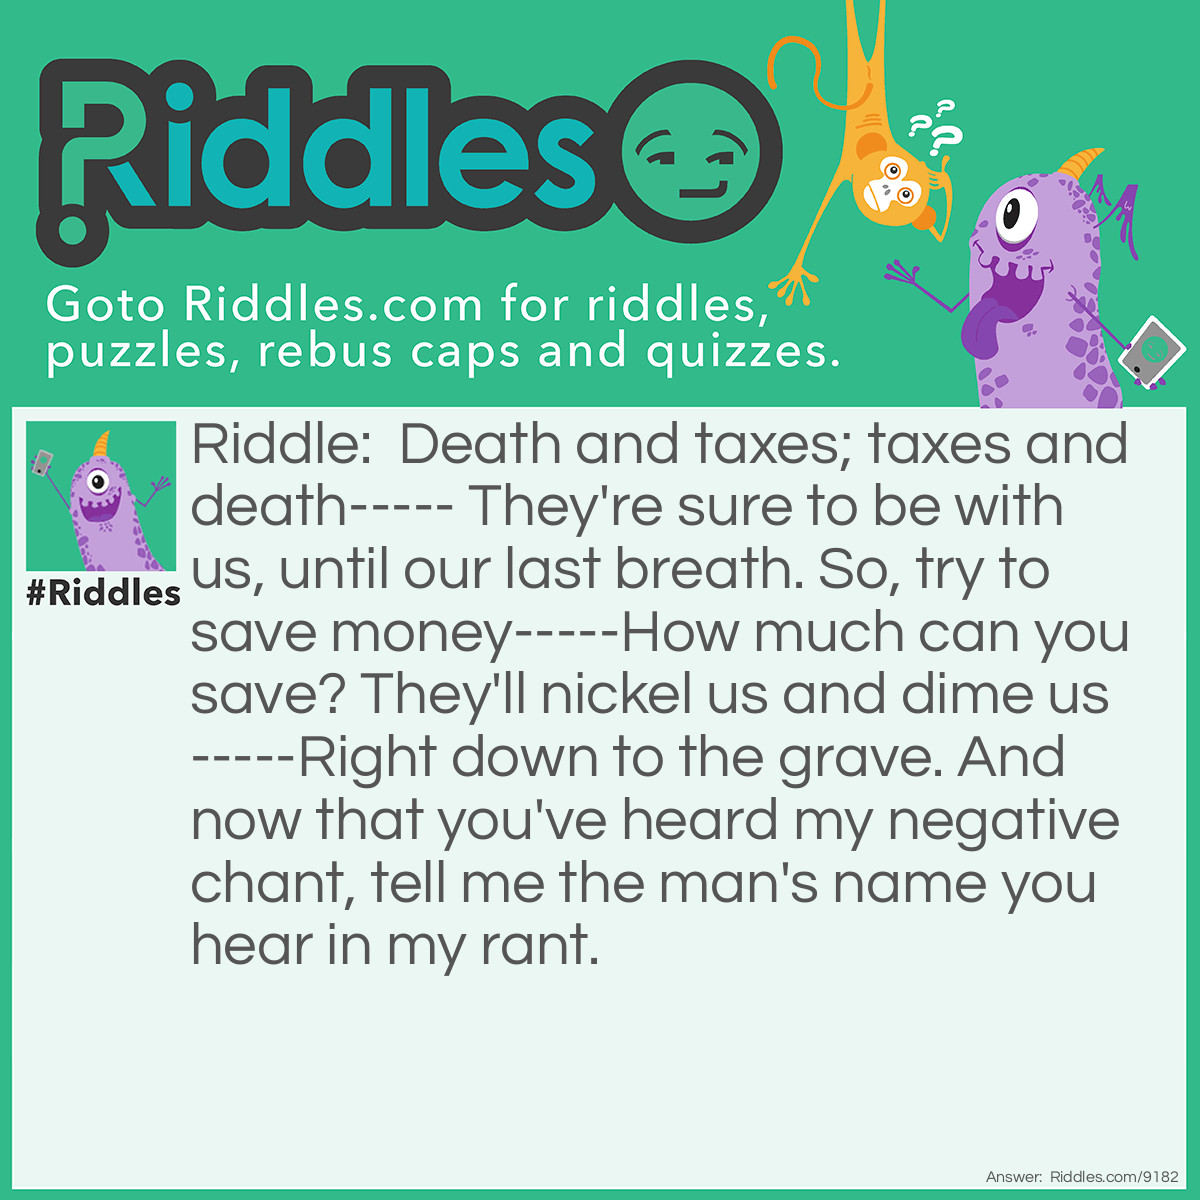 Riddle: Death and taxes; taxes and death----- They're sure to be with us, until our last breath. So, try to save money-----How much can you save? They'll nickel us and dime us-----Right down to the grave. And now that you've heard my negative chant, tell me the man's name you hear in my rant. Answer: The man's name is Nicholas (nickel us).